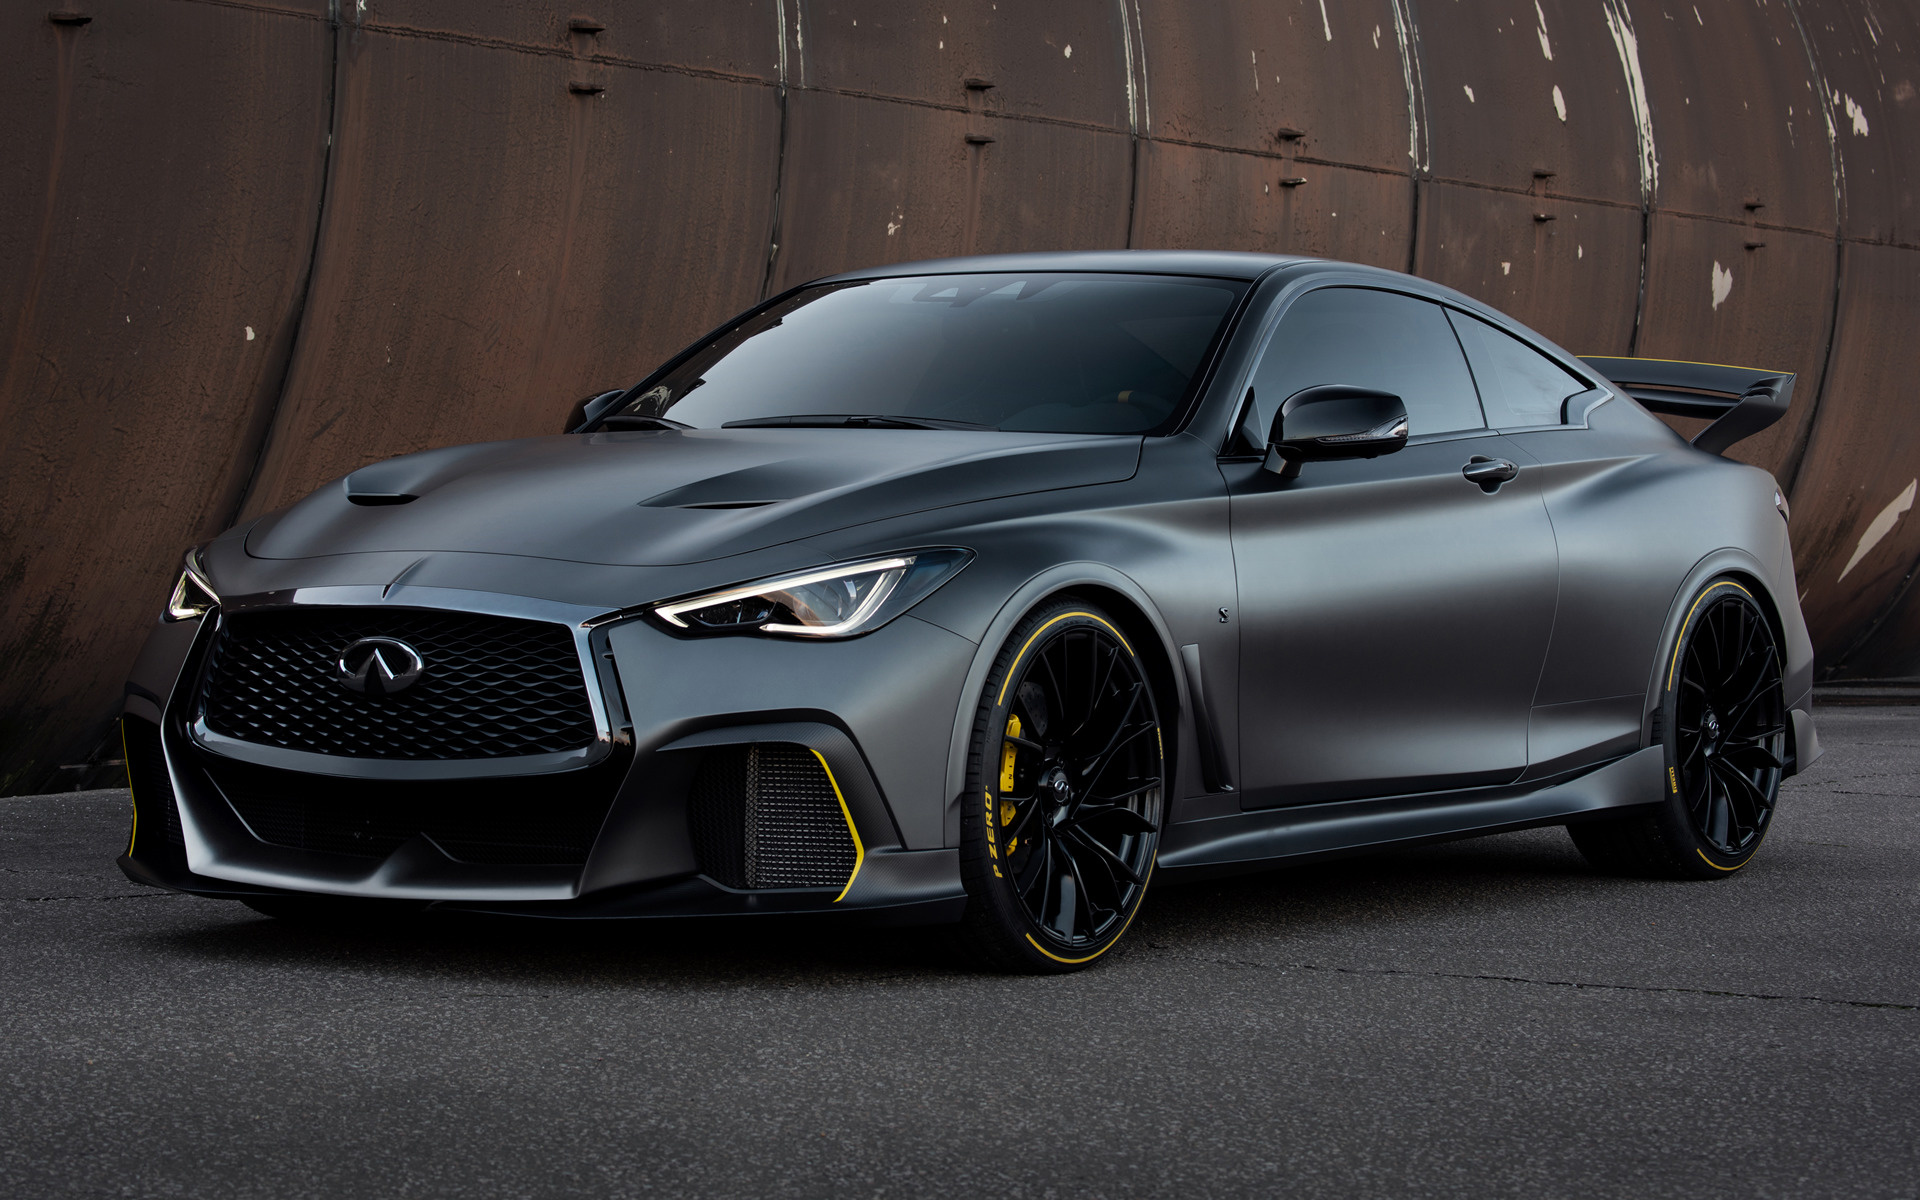 Front view of the 2016 . 2018 Infiniti Project Black S Prototype - Wallpapers and